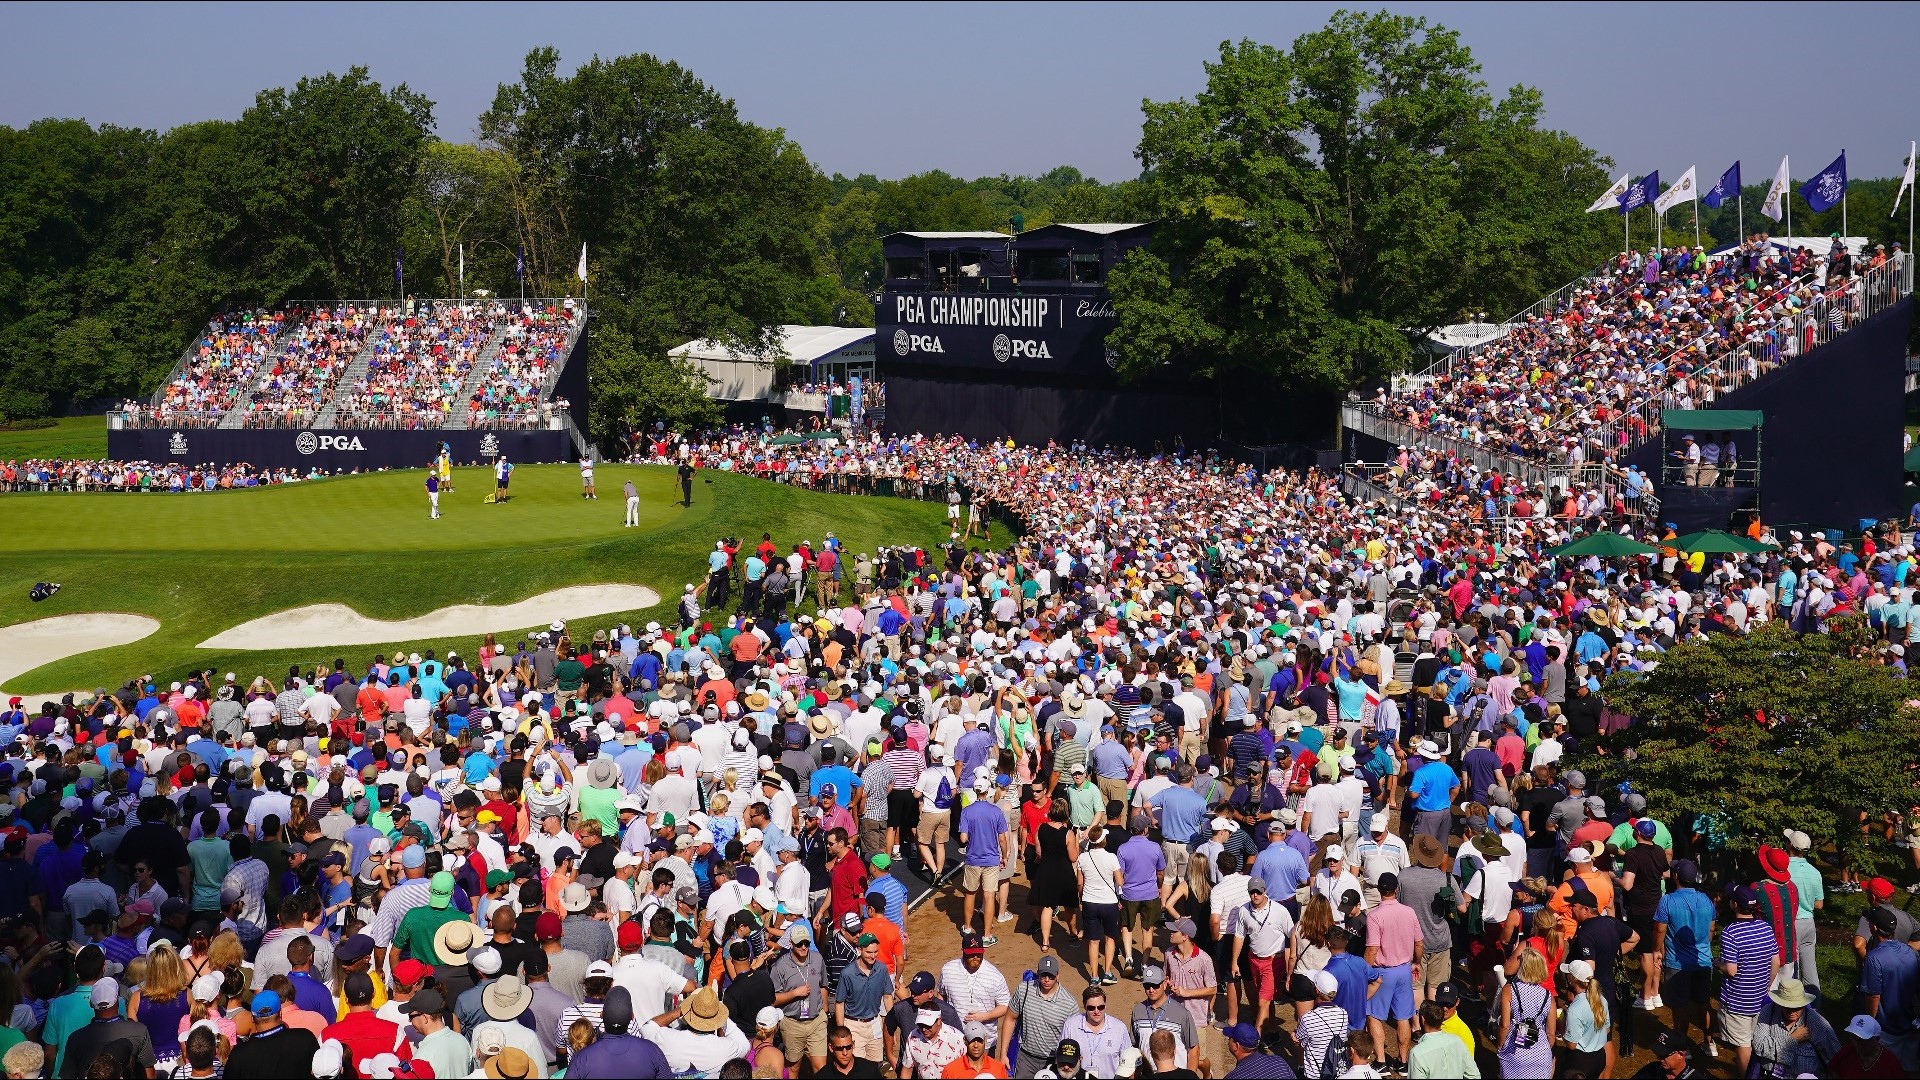 PHOTOS Massive crowds at PGA Championship in St. Louis